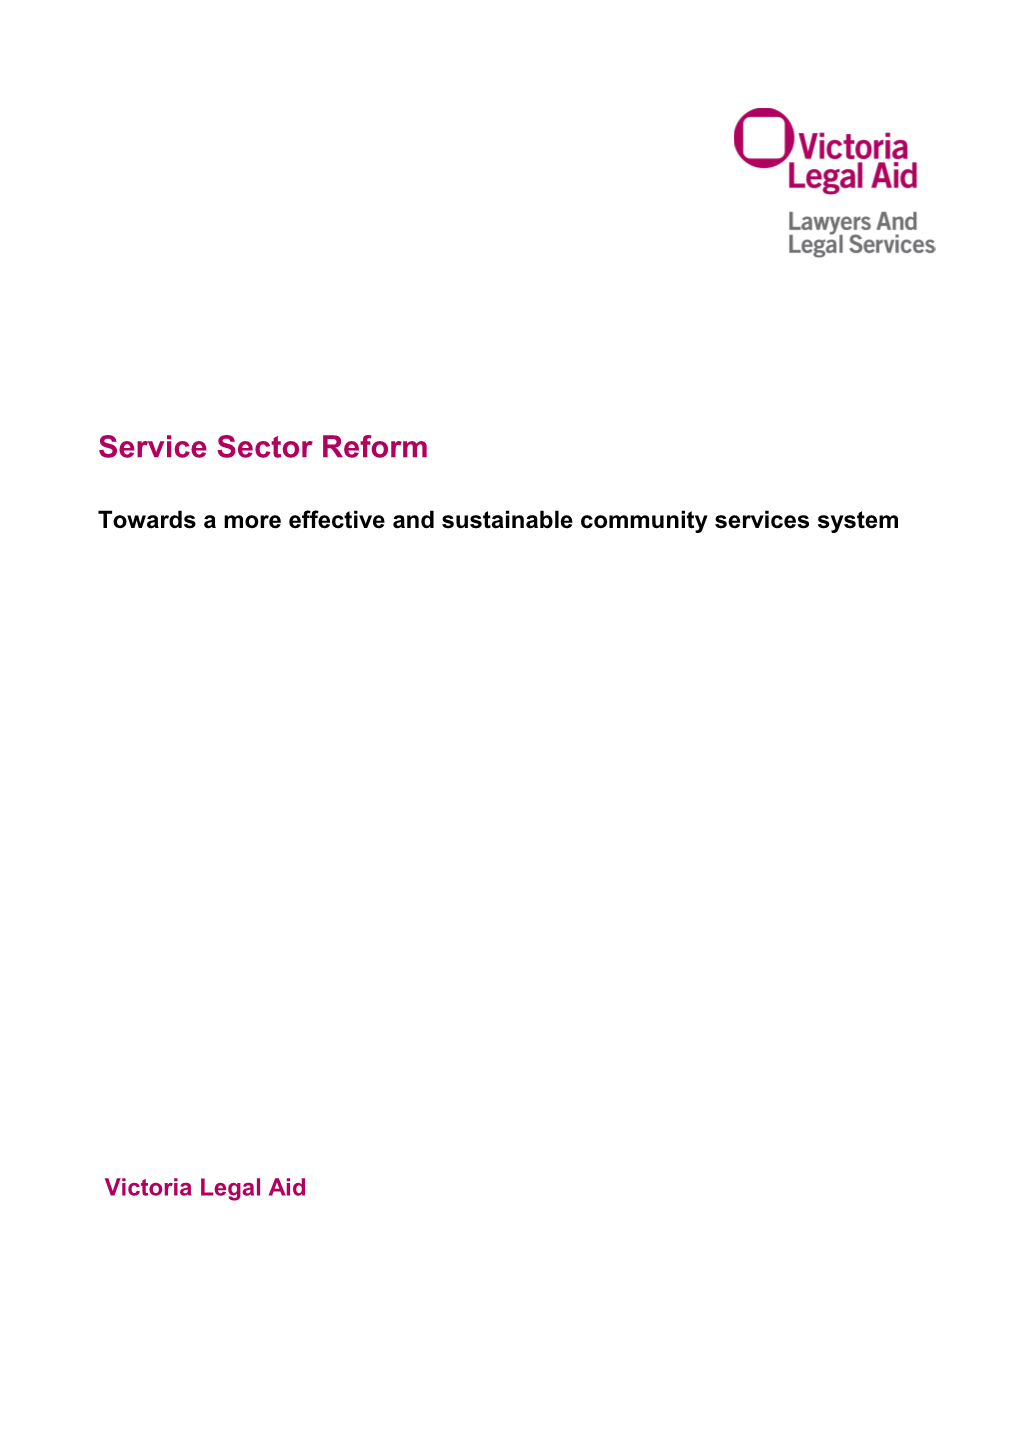 Towards a More Effective and Sustainable Community Services System